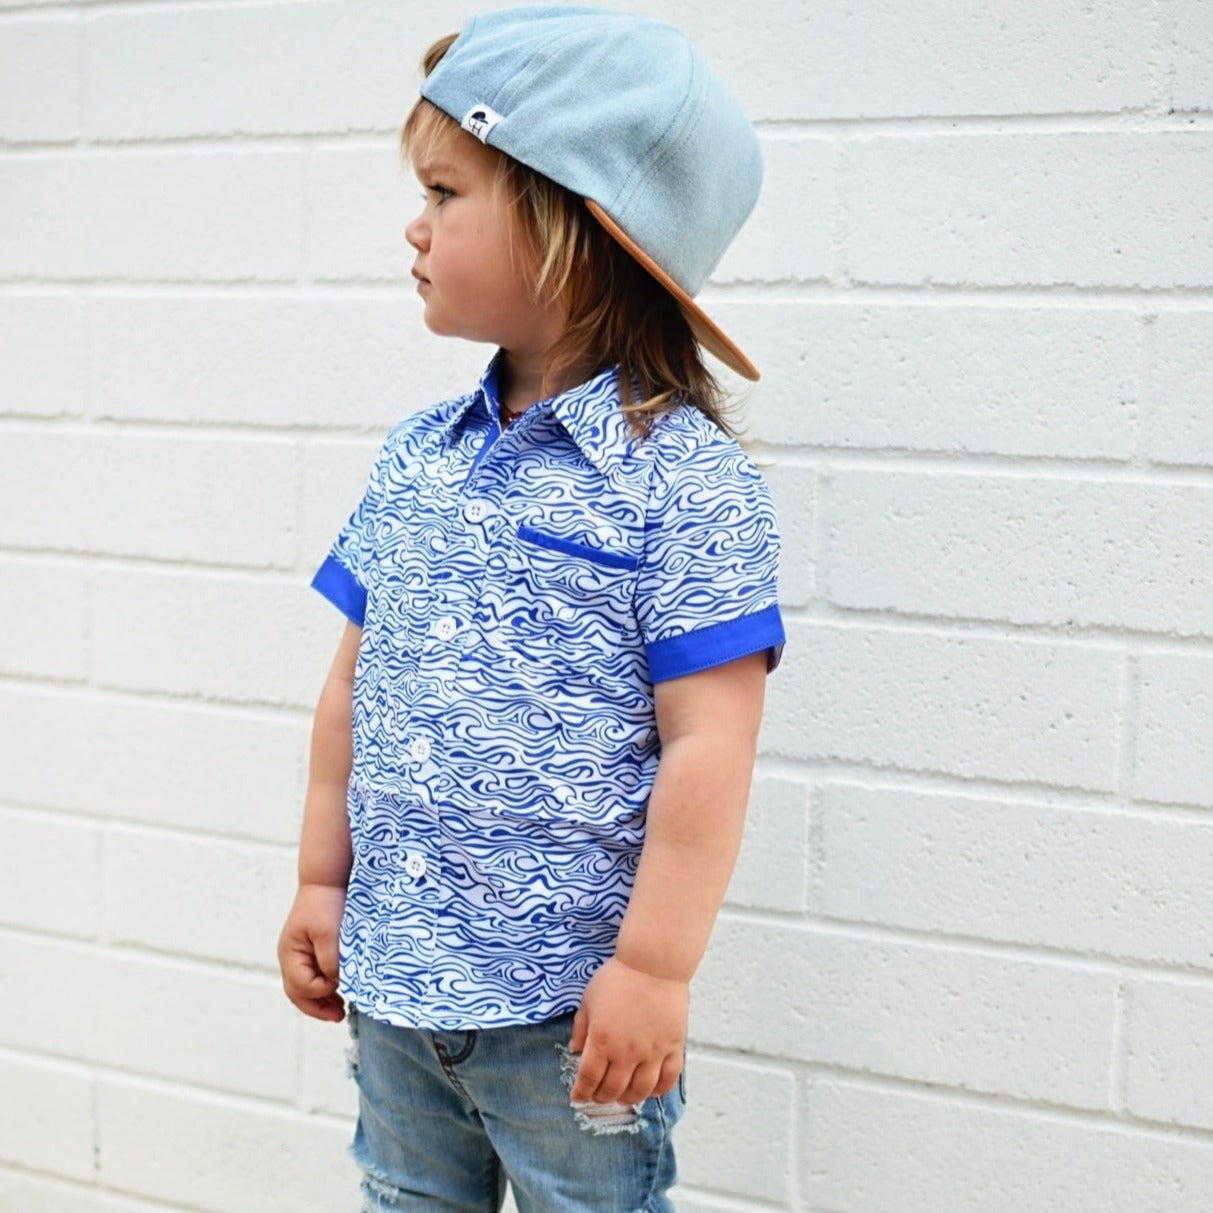 Waves Collared Shirt - George Hats